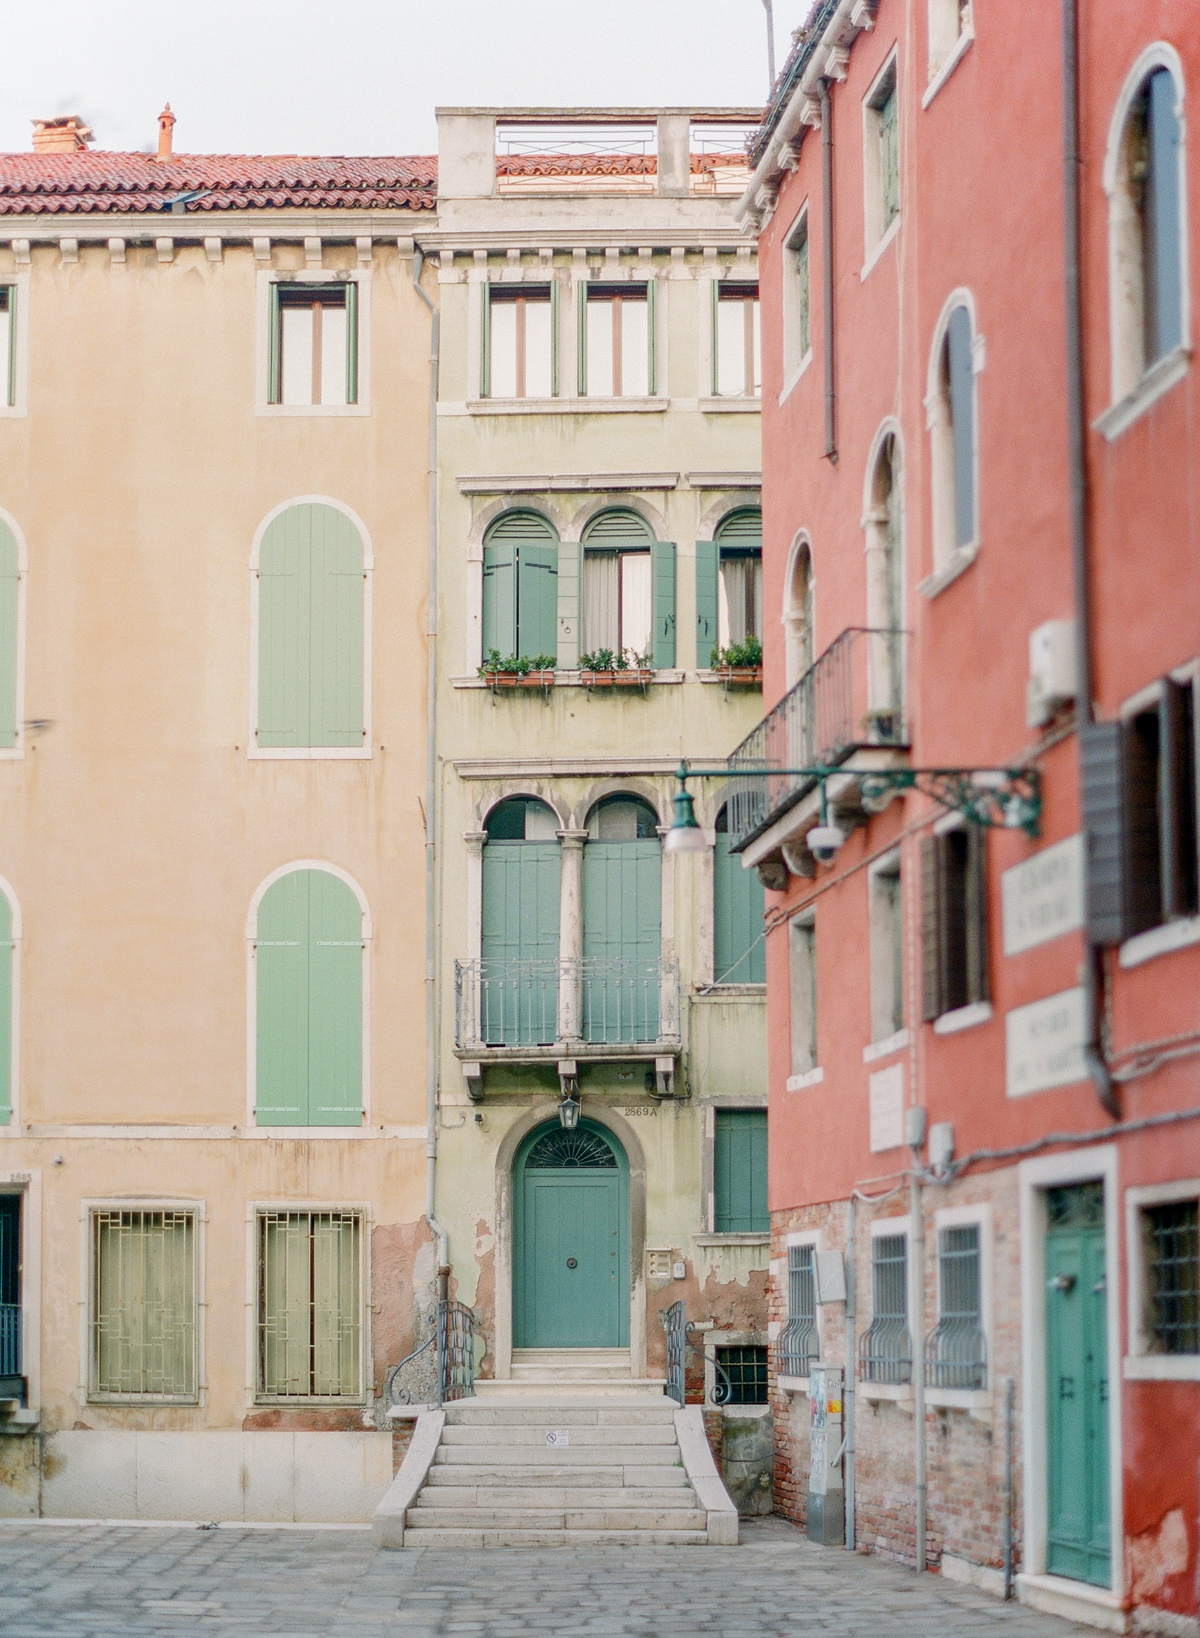 Venice Wedding Photographer | Italy Film Photography | Molly Carr Photography | Colorful Architecture